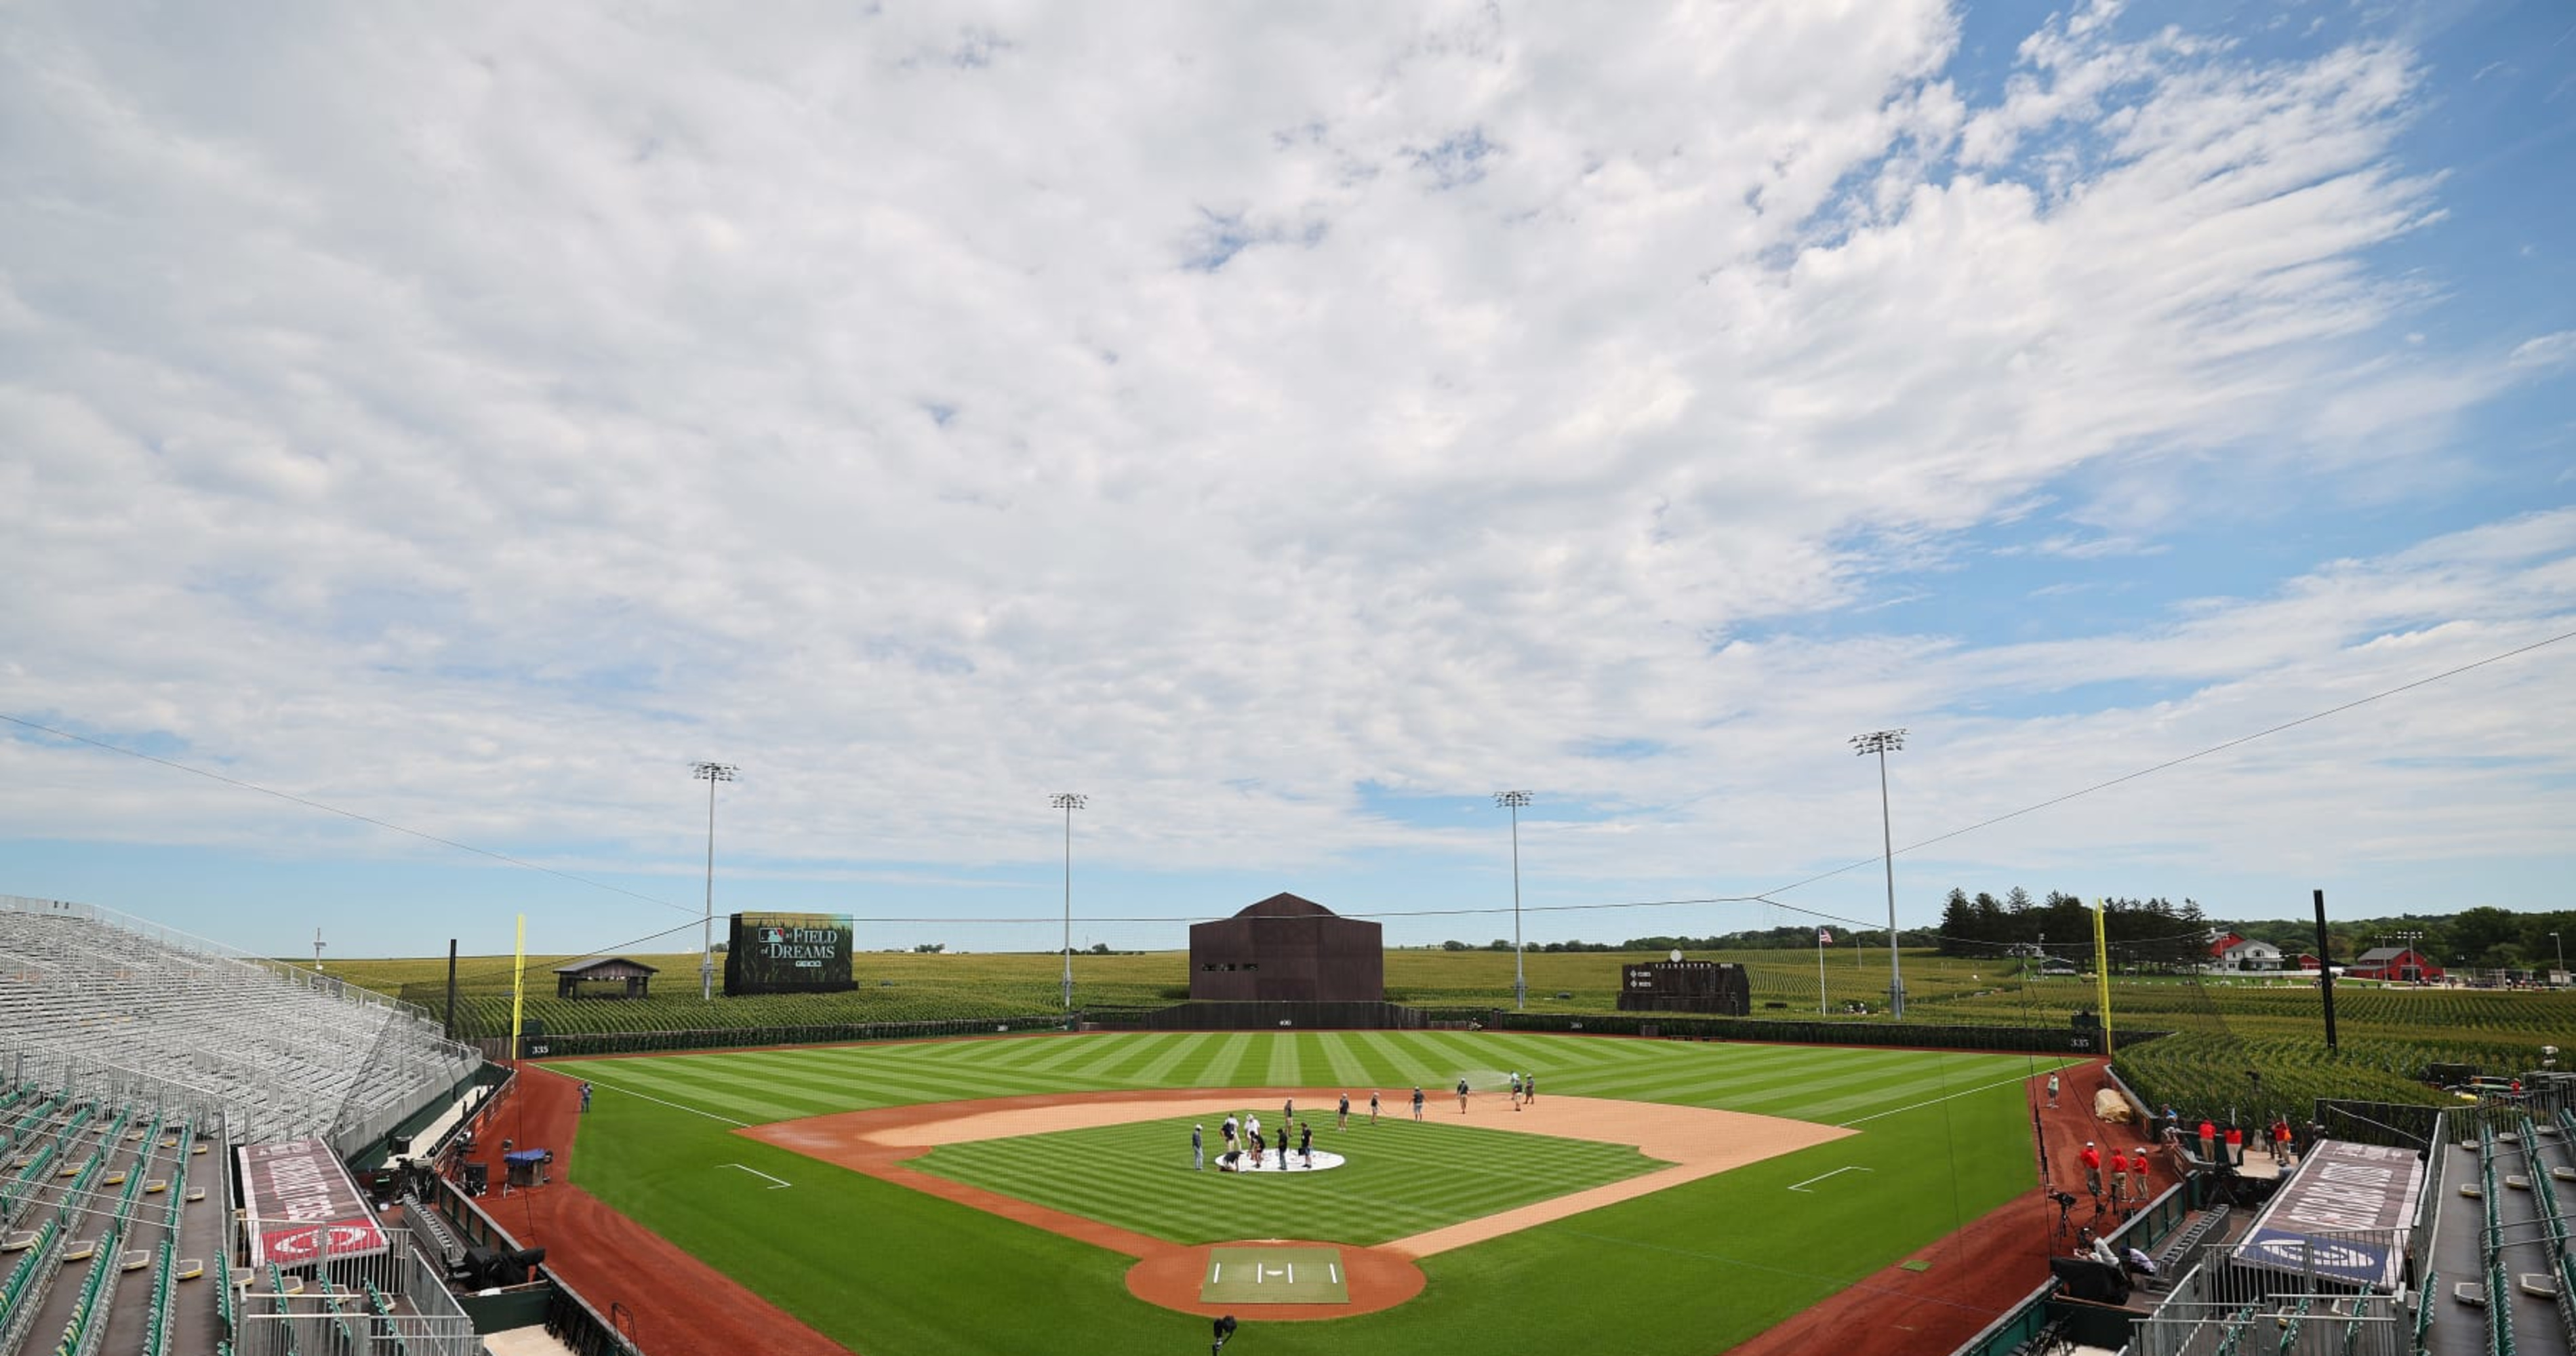 MLB won't return to Iowa for Field of Dreams game in 2023 due to  construction, Frank Thomas claims